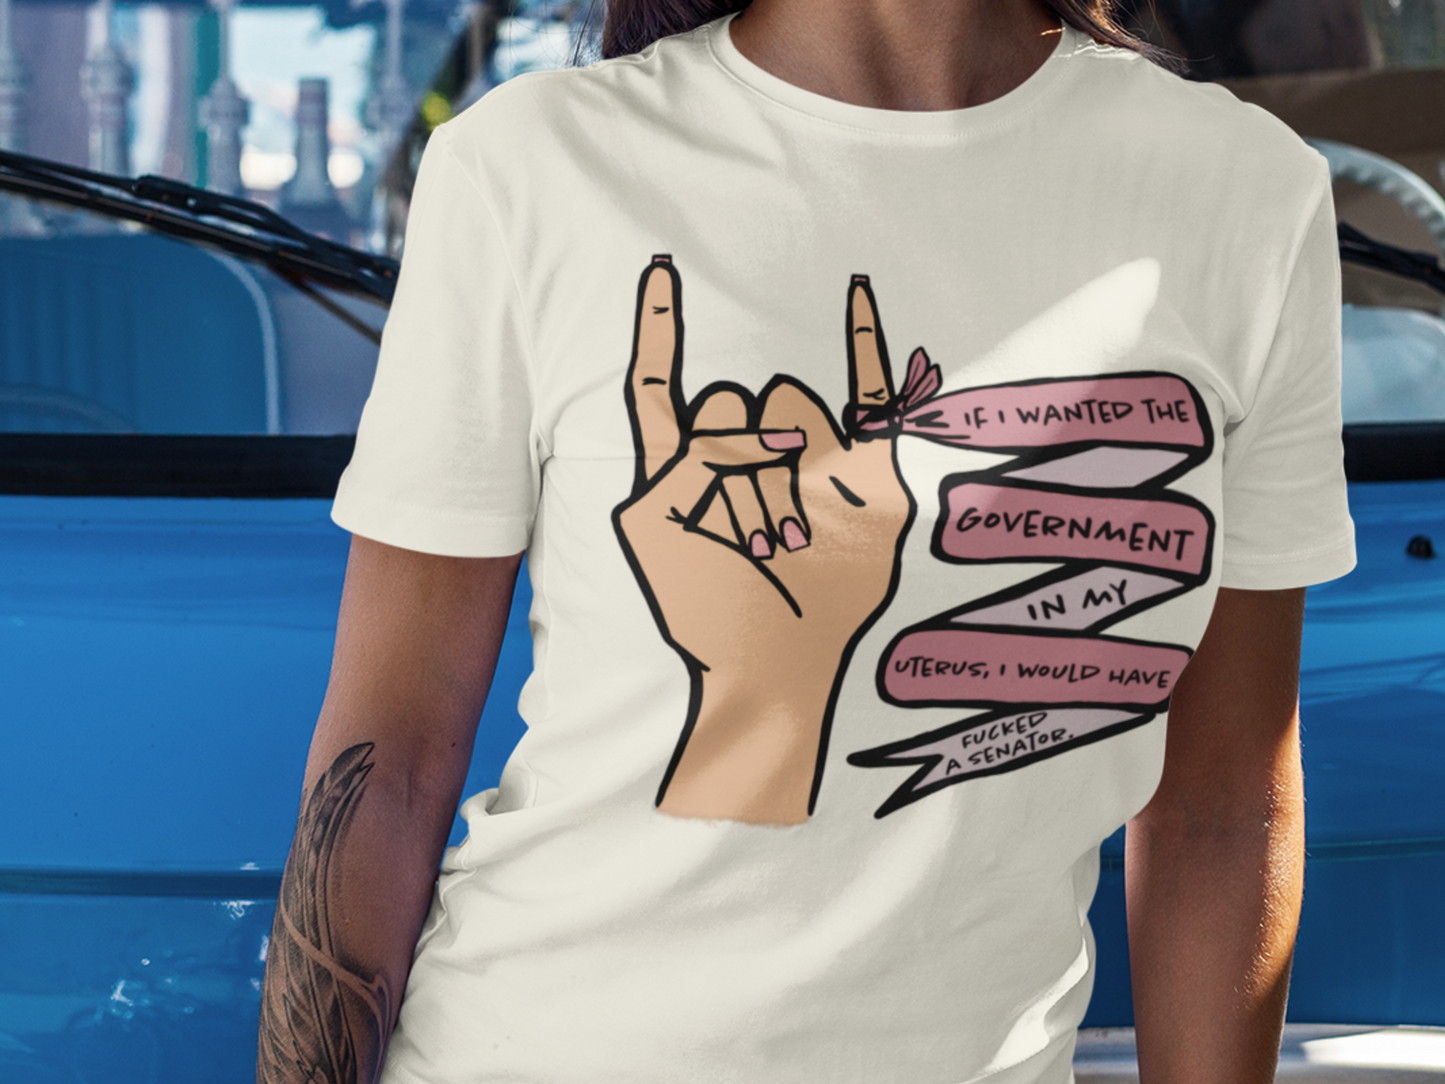 If I wanted the Government in my Uterus I would Have F*cked a Senator T-shirt